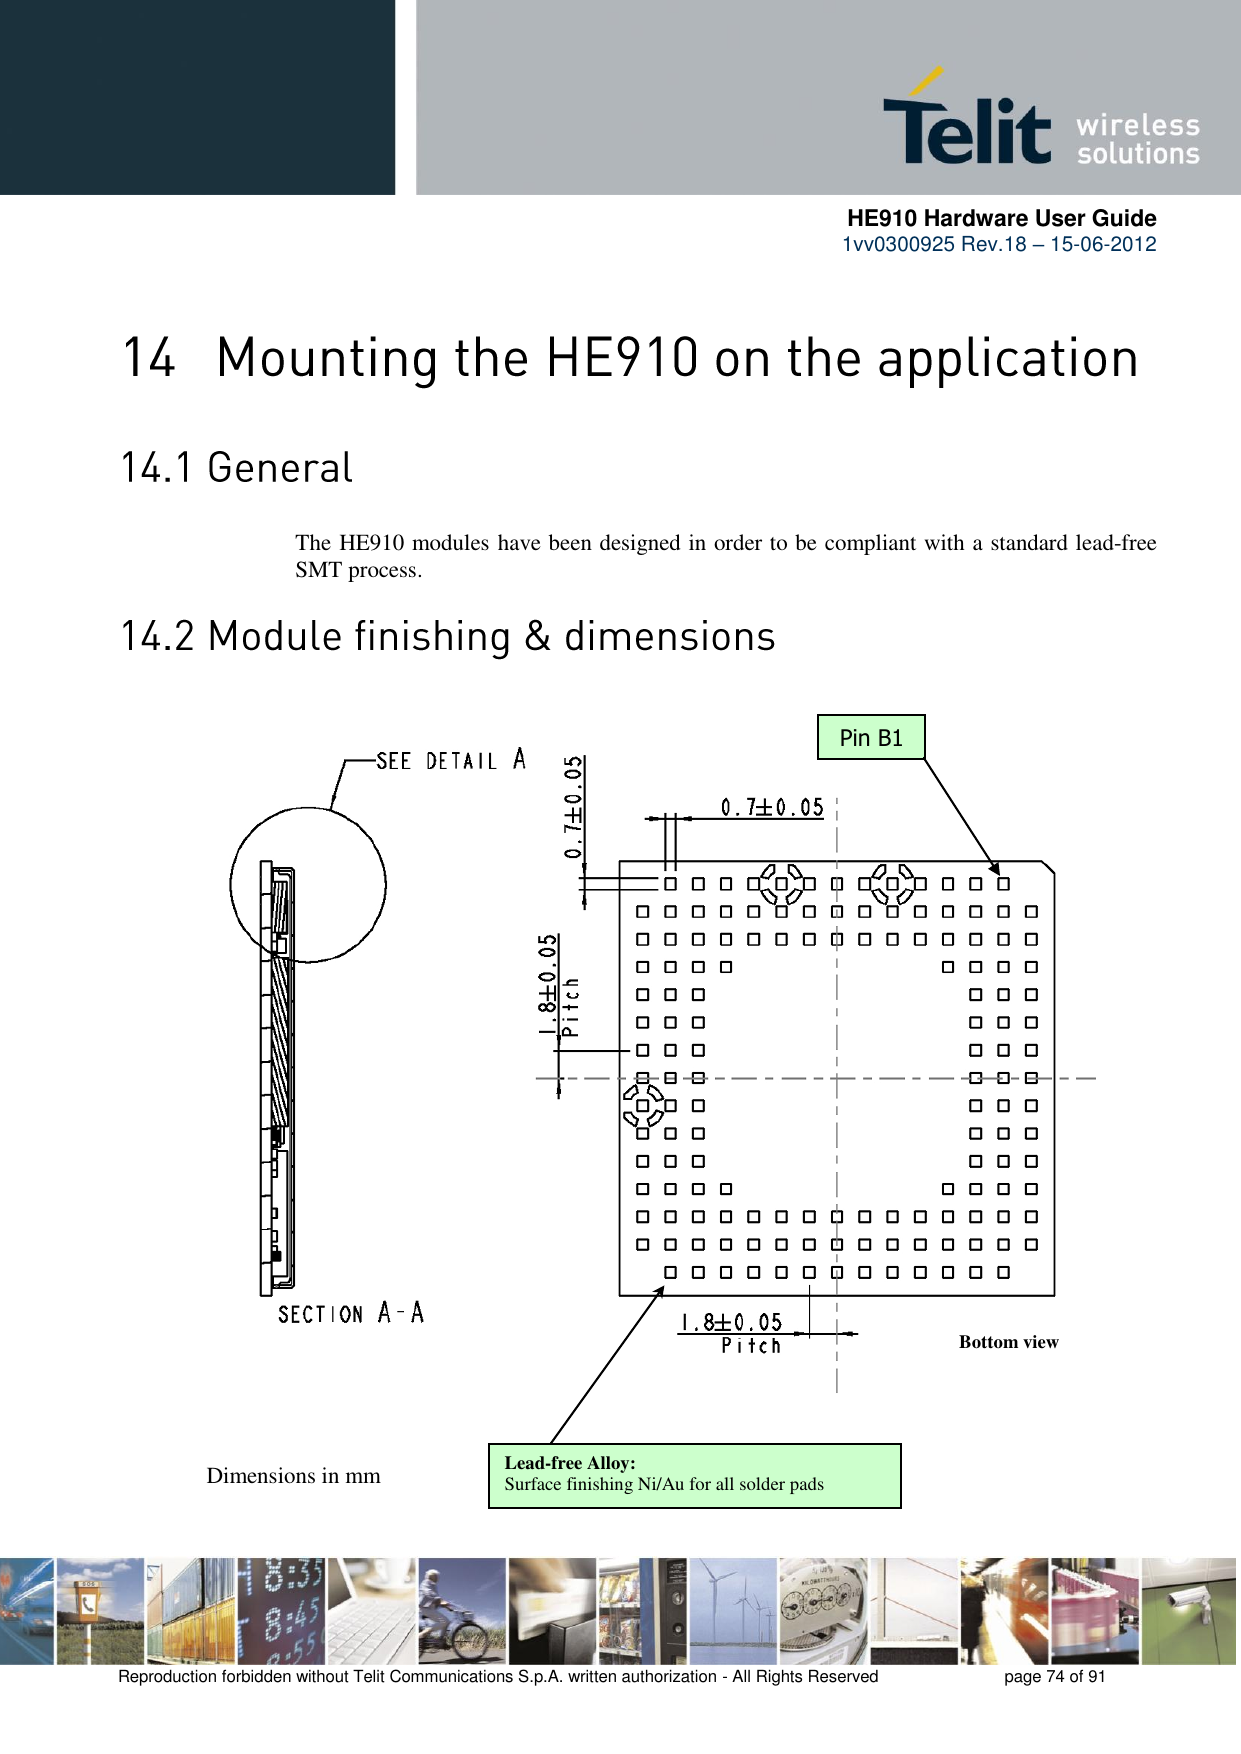      HE910 Hardware User Guide 1vv0300925 Rev.18 – 15-06-2012    Reproduction forbidden without Telit Communications S.p.A. written authorization - All Rights Reserved    page 74 of 91    The HE910 modules have been designed in order to be compliant with a standard lead-free SMT process.    Pin B1 Dimensions in mm Bottom view Lead-free Alloy: Surface finishing Ni/Au for all solder pads  